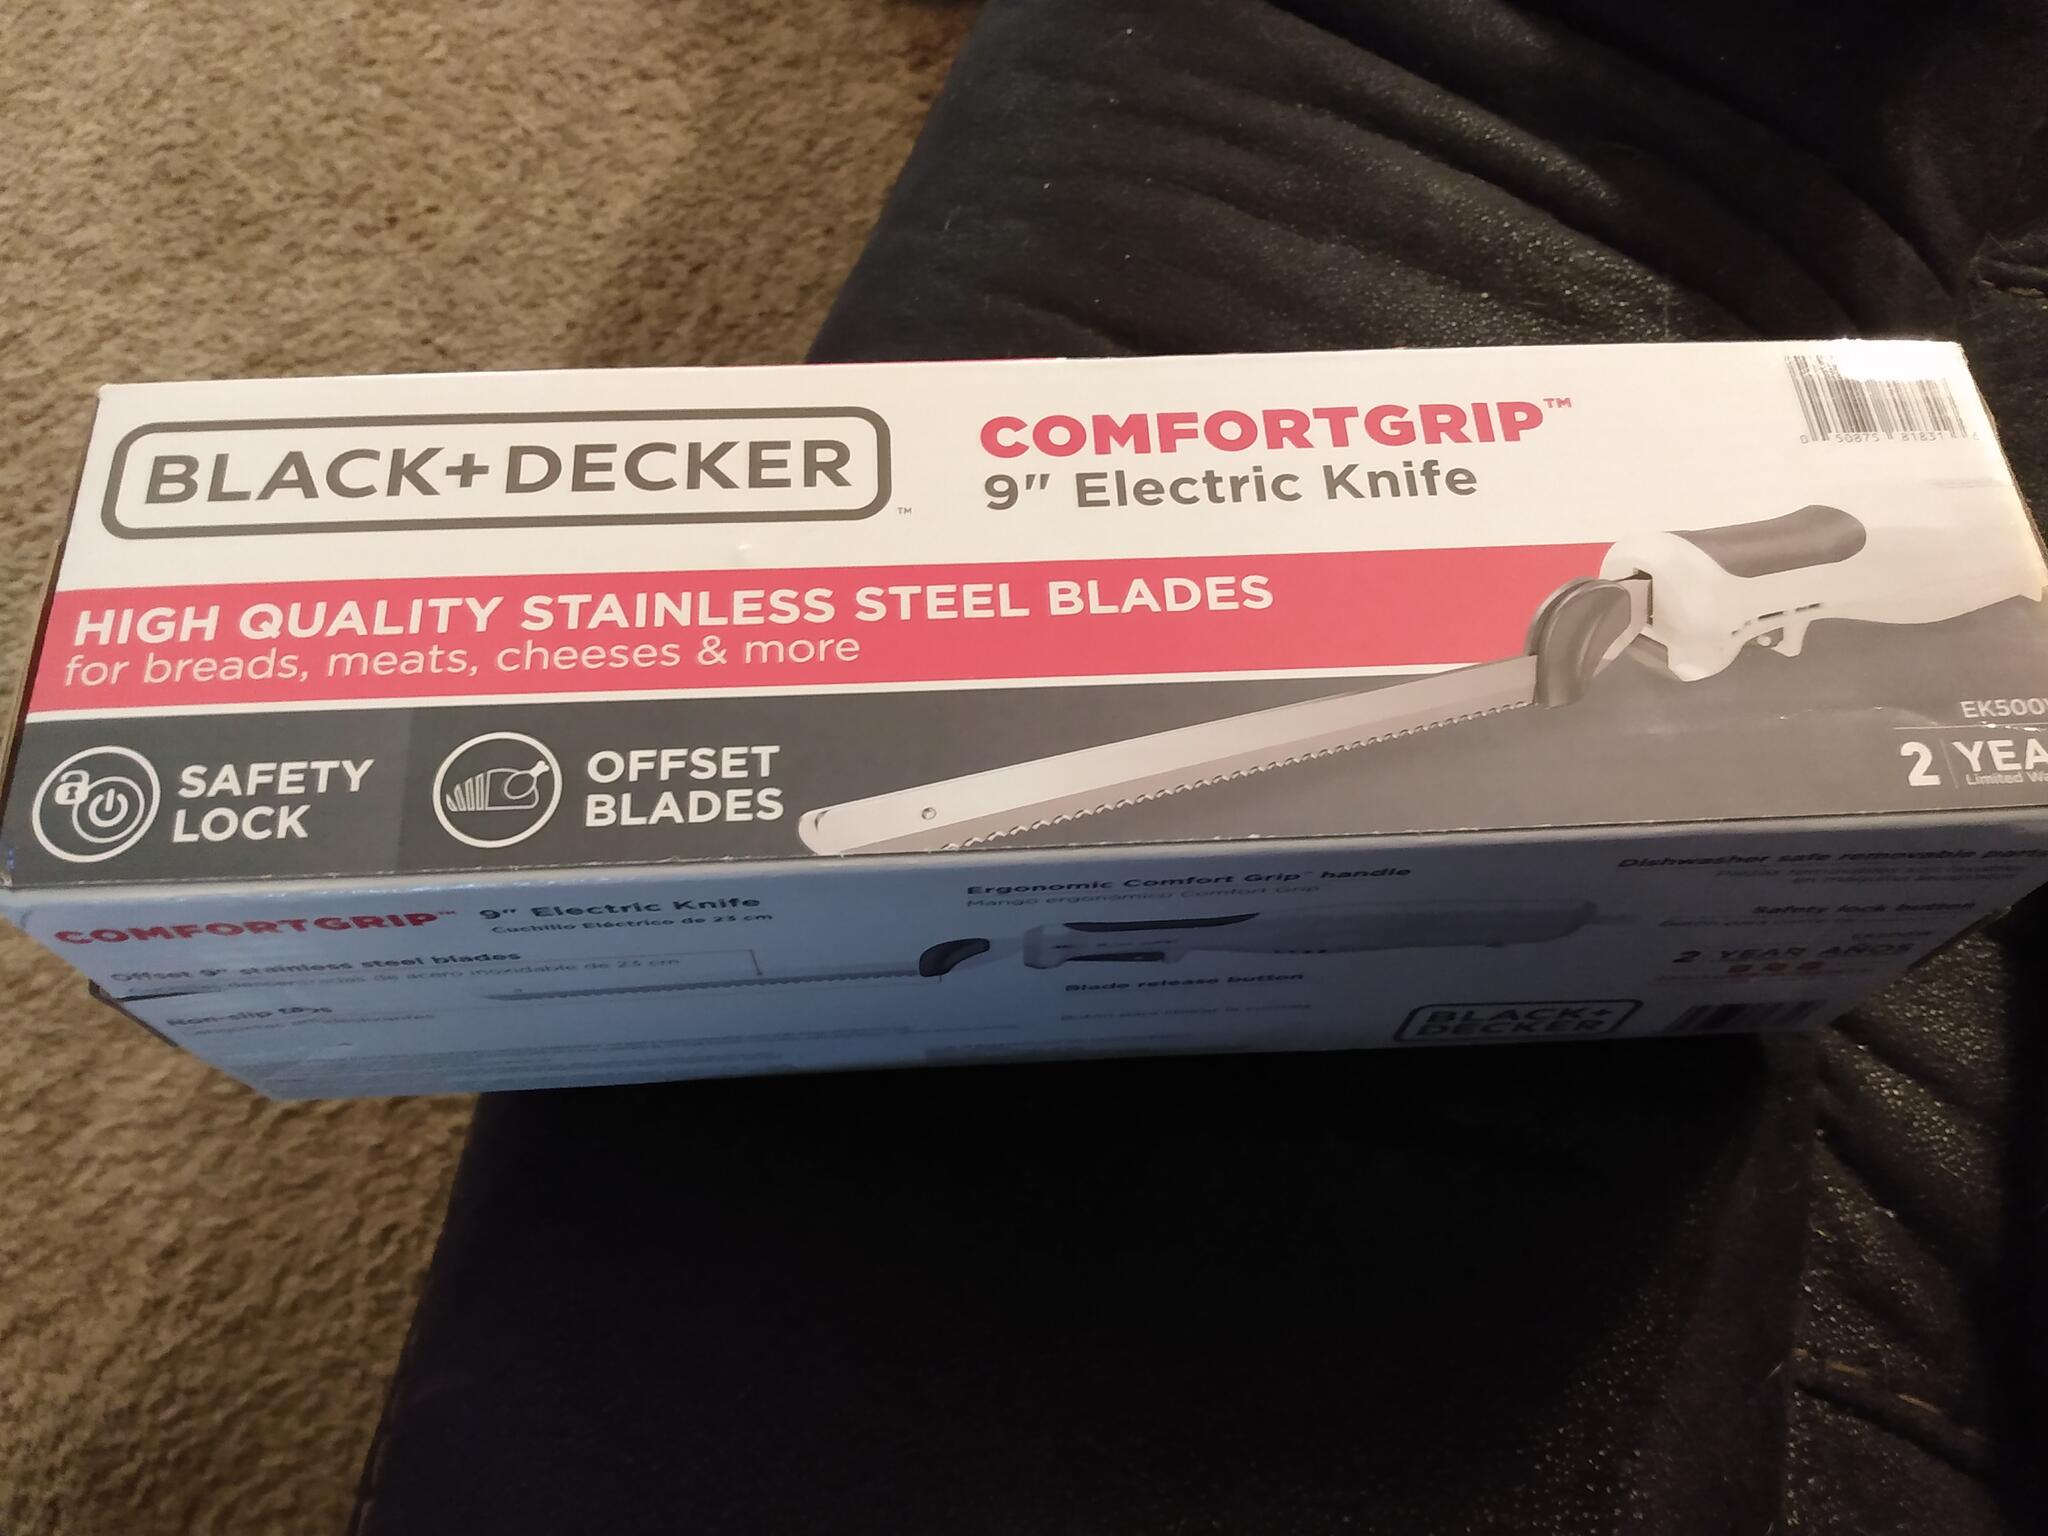 Black & Decker Electric Knife NEVER USED! PICKUP TODAY $8 REDUCED! For $8  In Pleasant Valley, NY